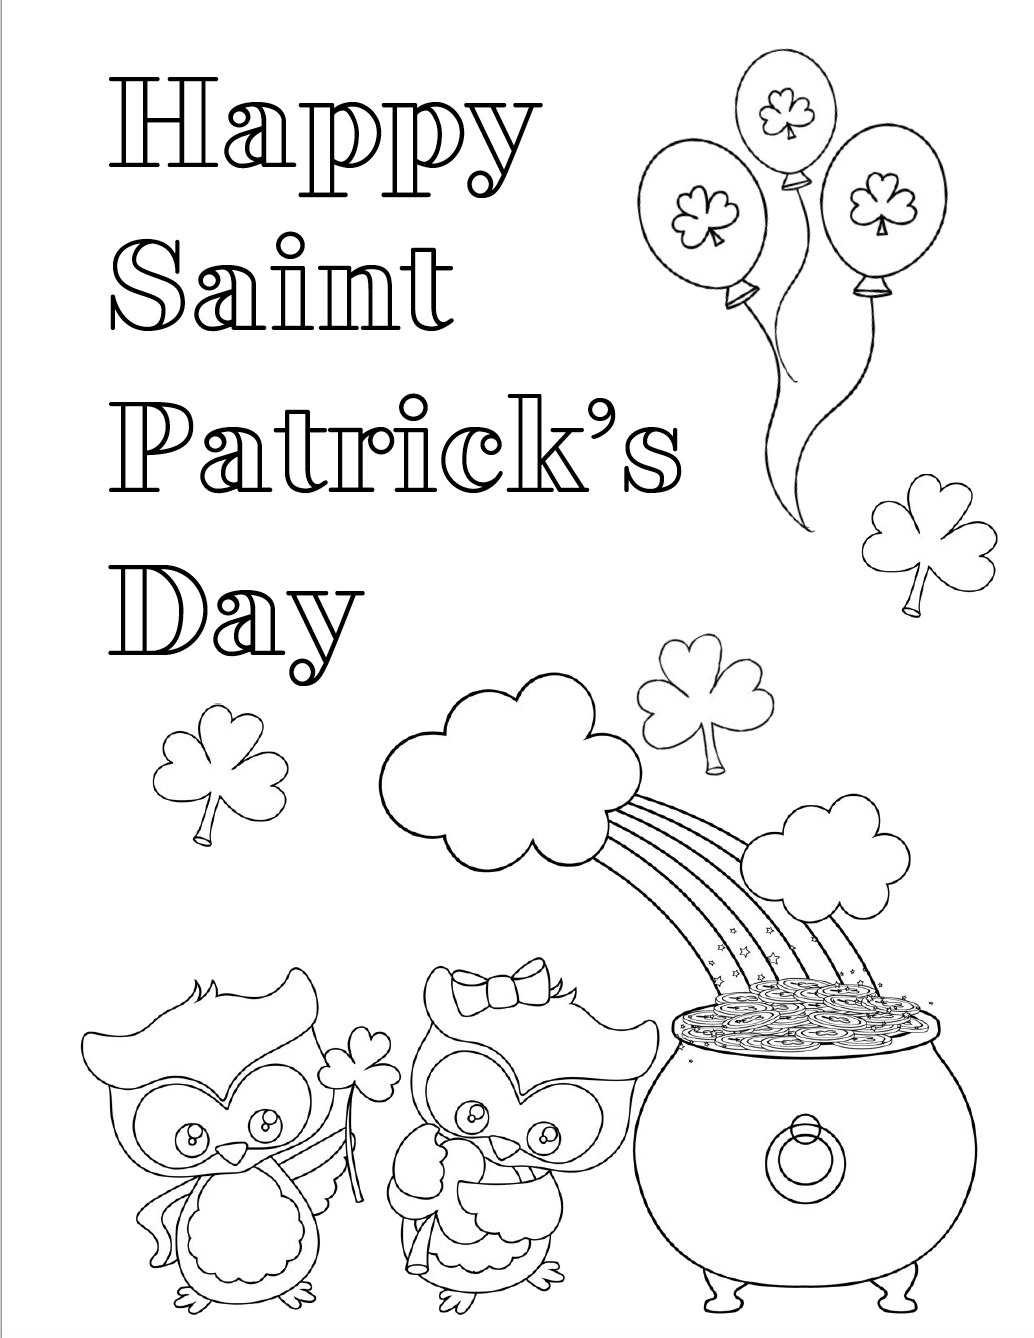 Free Printable St Patrick s Day Coloring Pages: 4 Designs